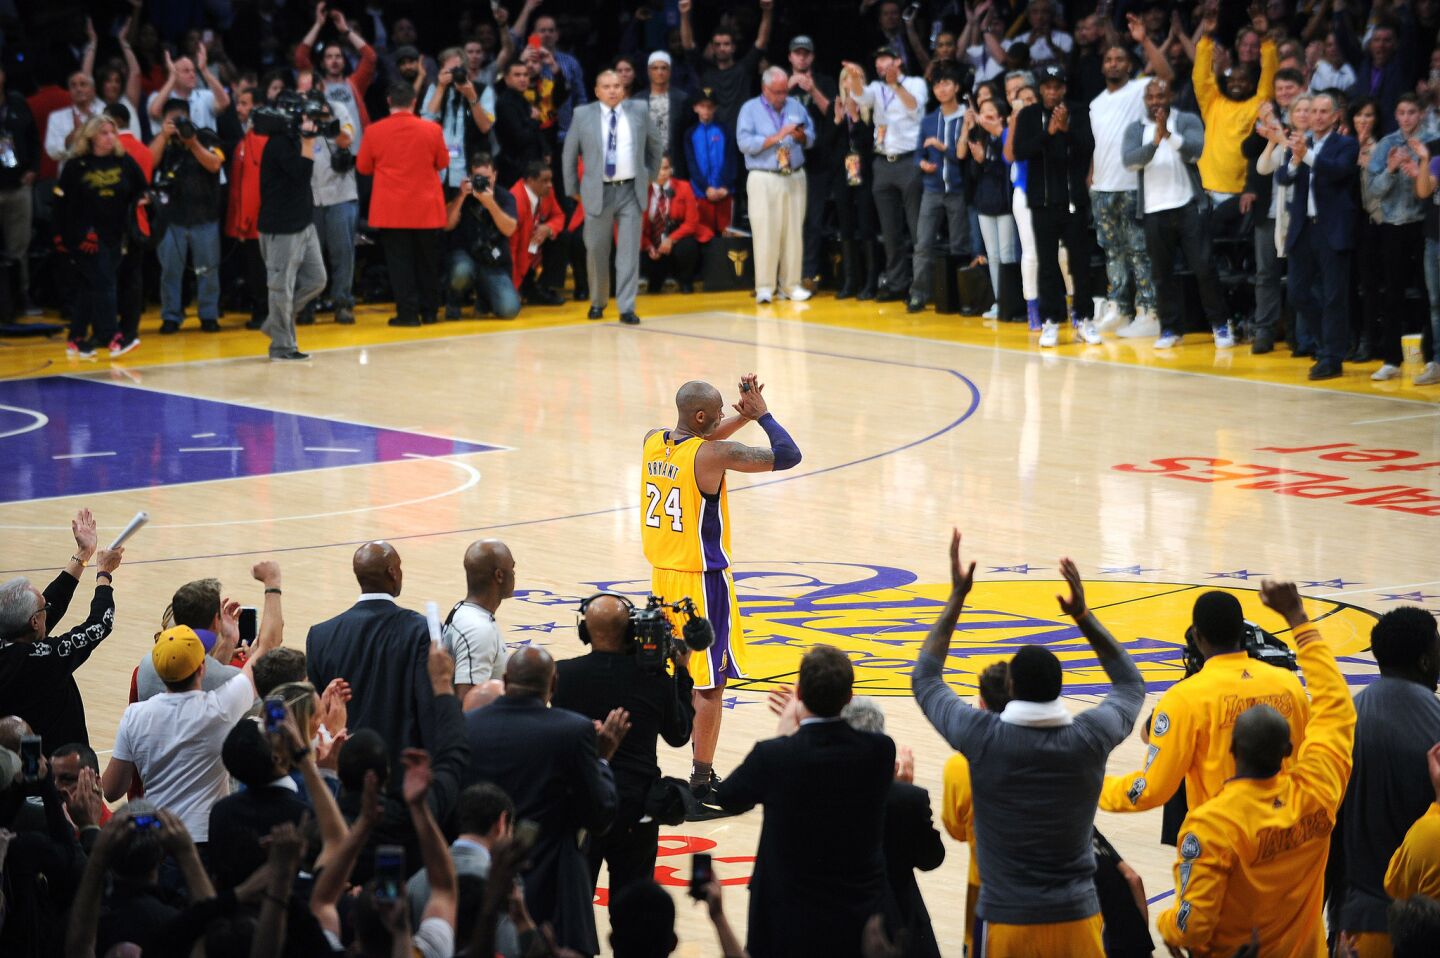 Kobe Bryant salutes the crowd at the end of his final game at Staples Center.